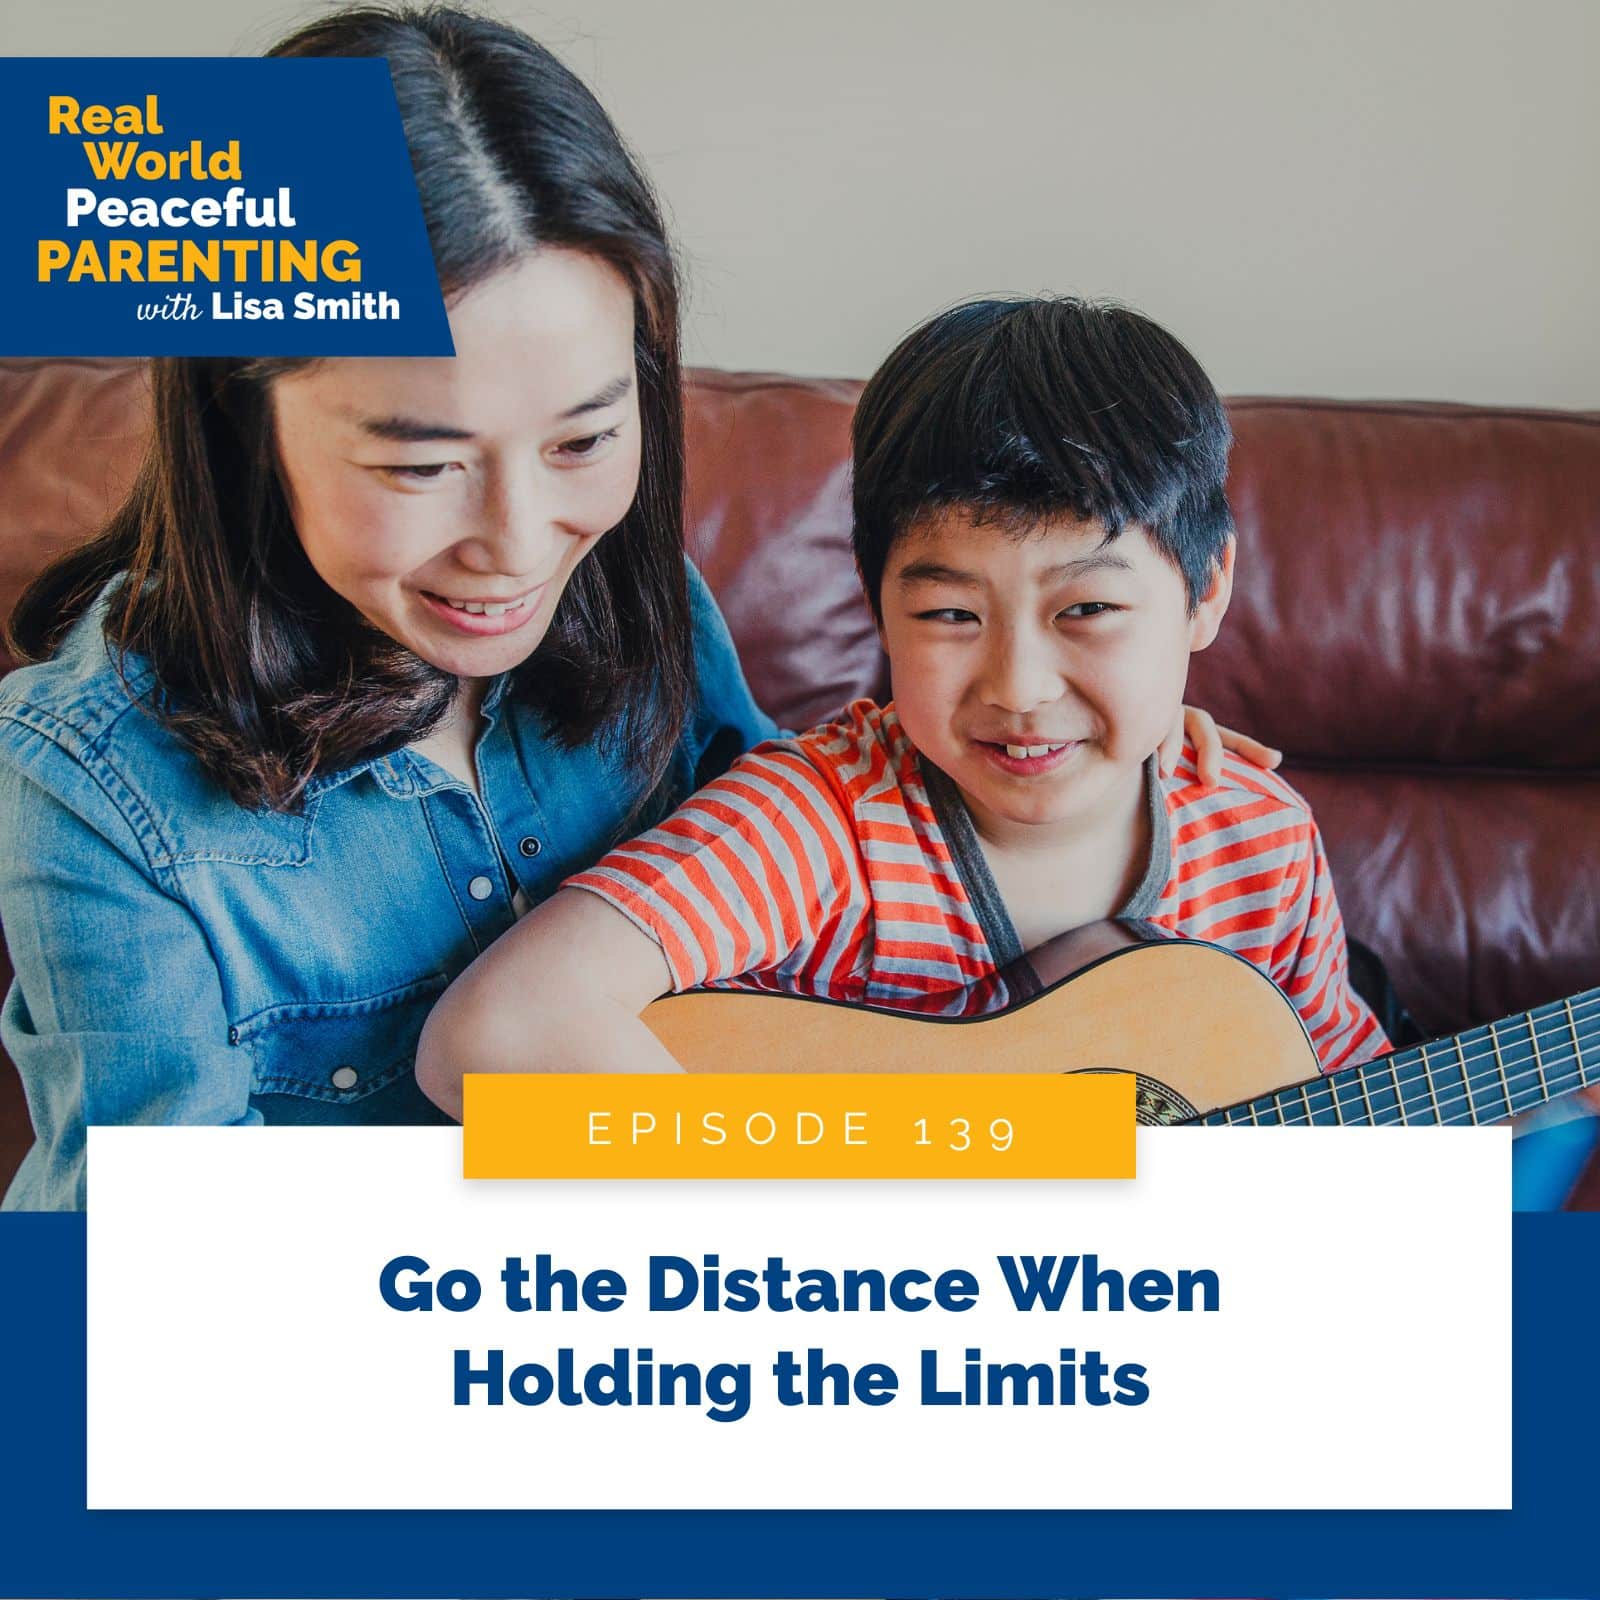 Real World Peaceful Parenting Lisa Smith | Go the Distance When Holding the Limits